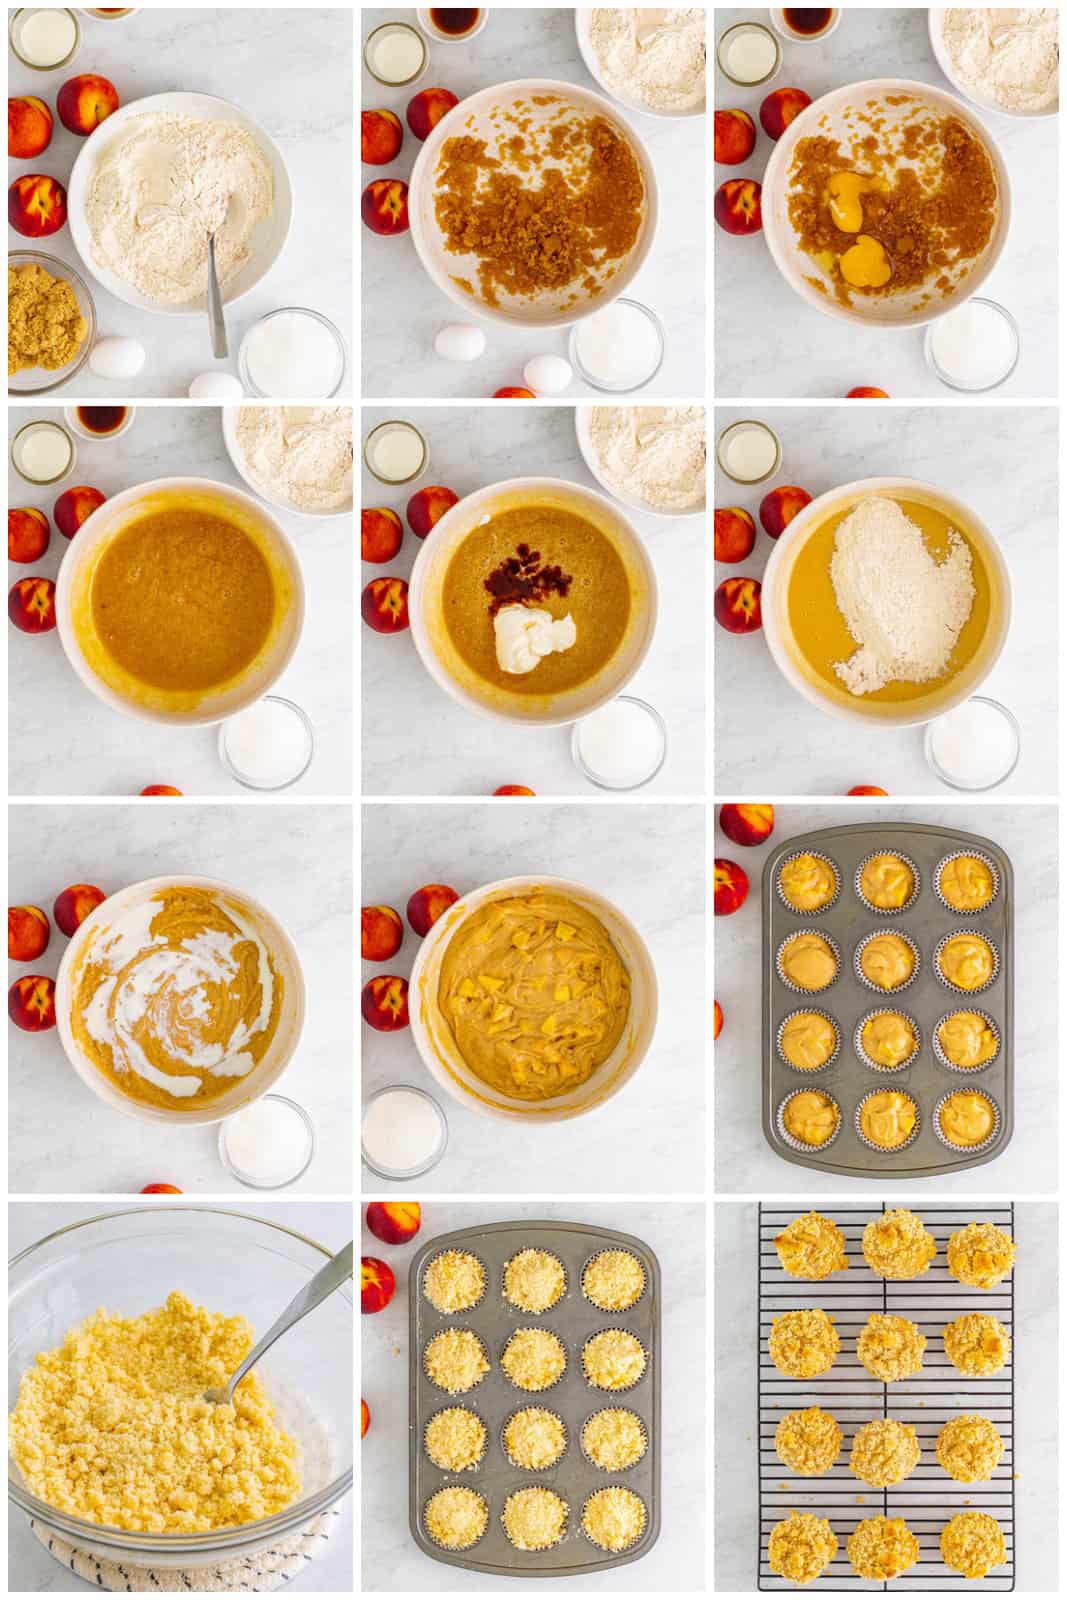 Step by step photos on how to make Peach Muffins.